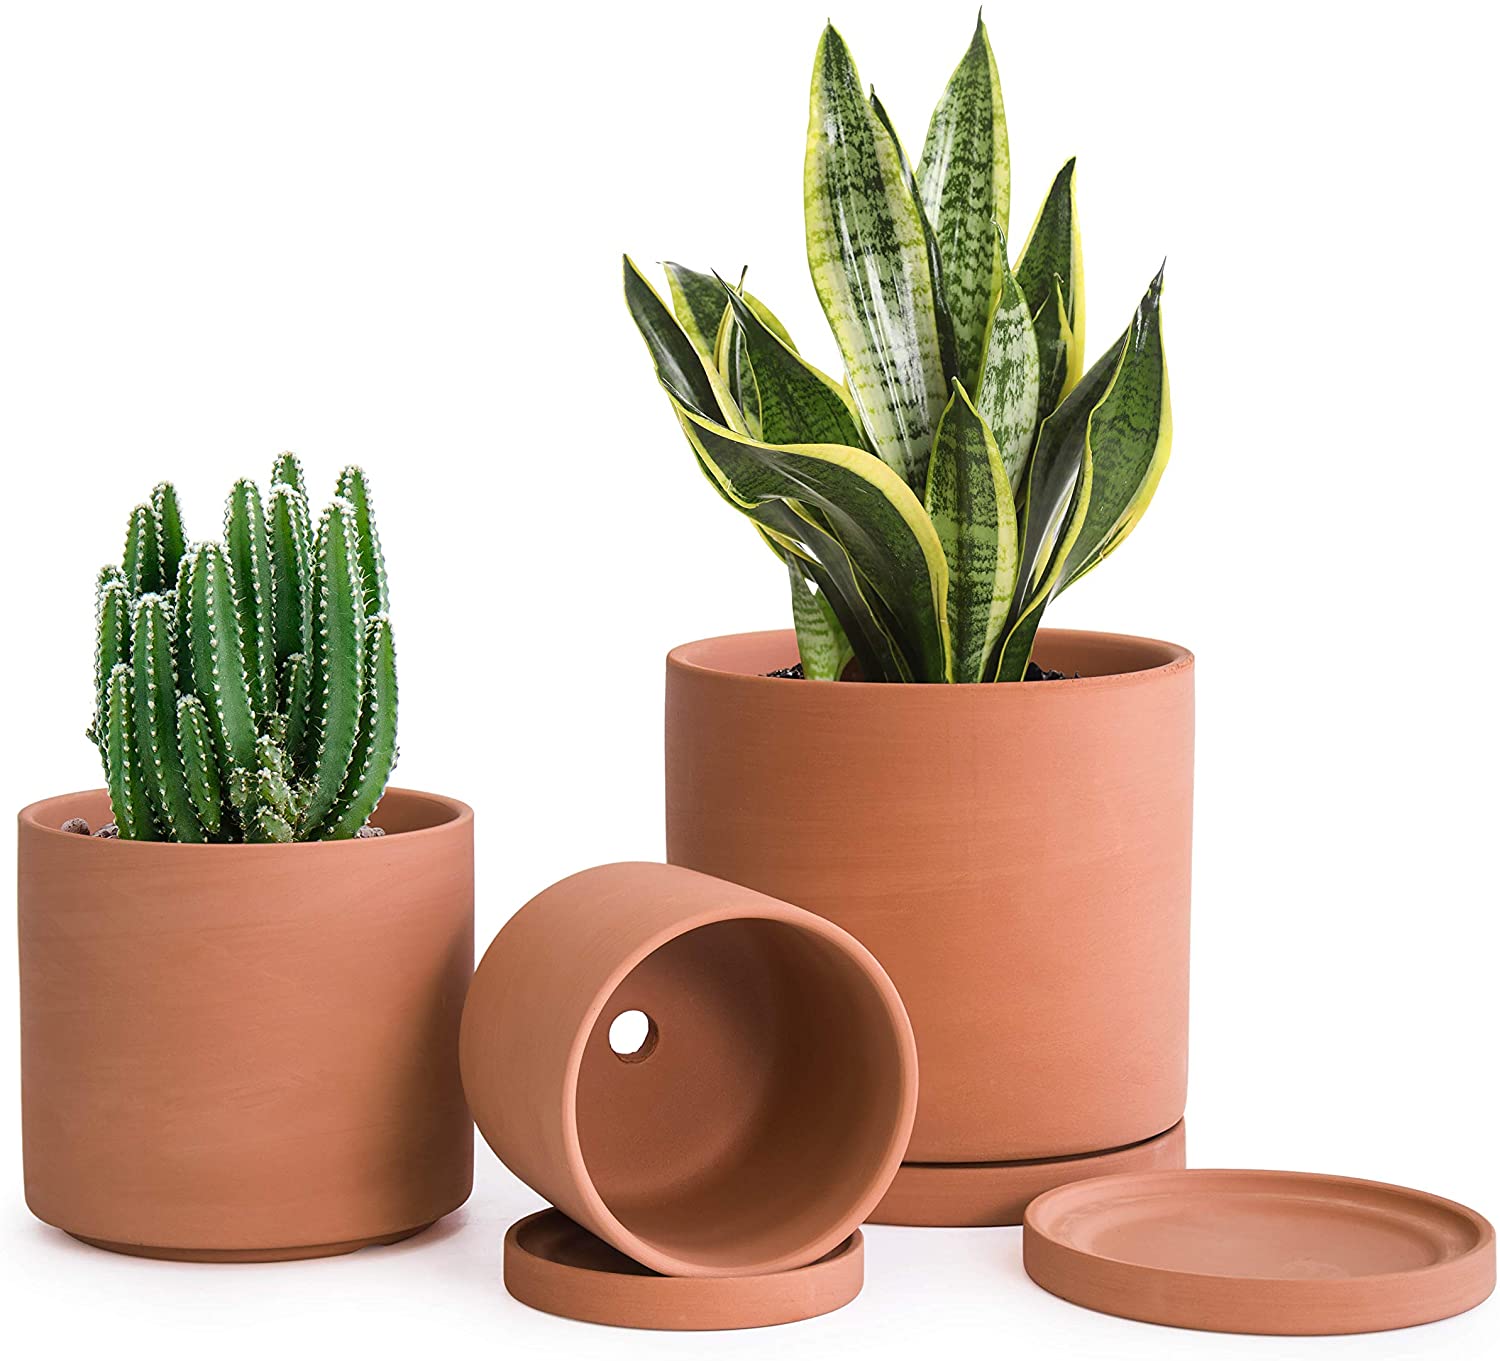 Plants in various models of the terracotta pots by d'vine dev